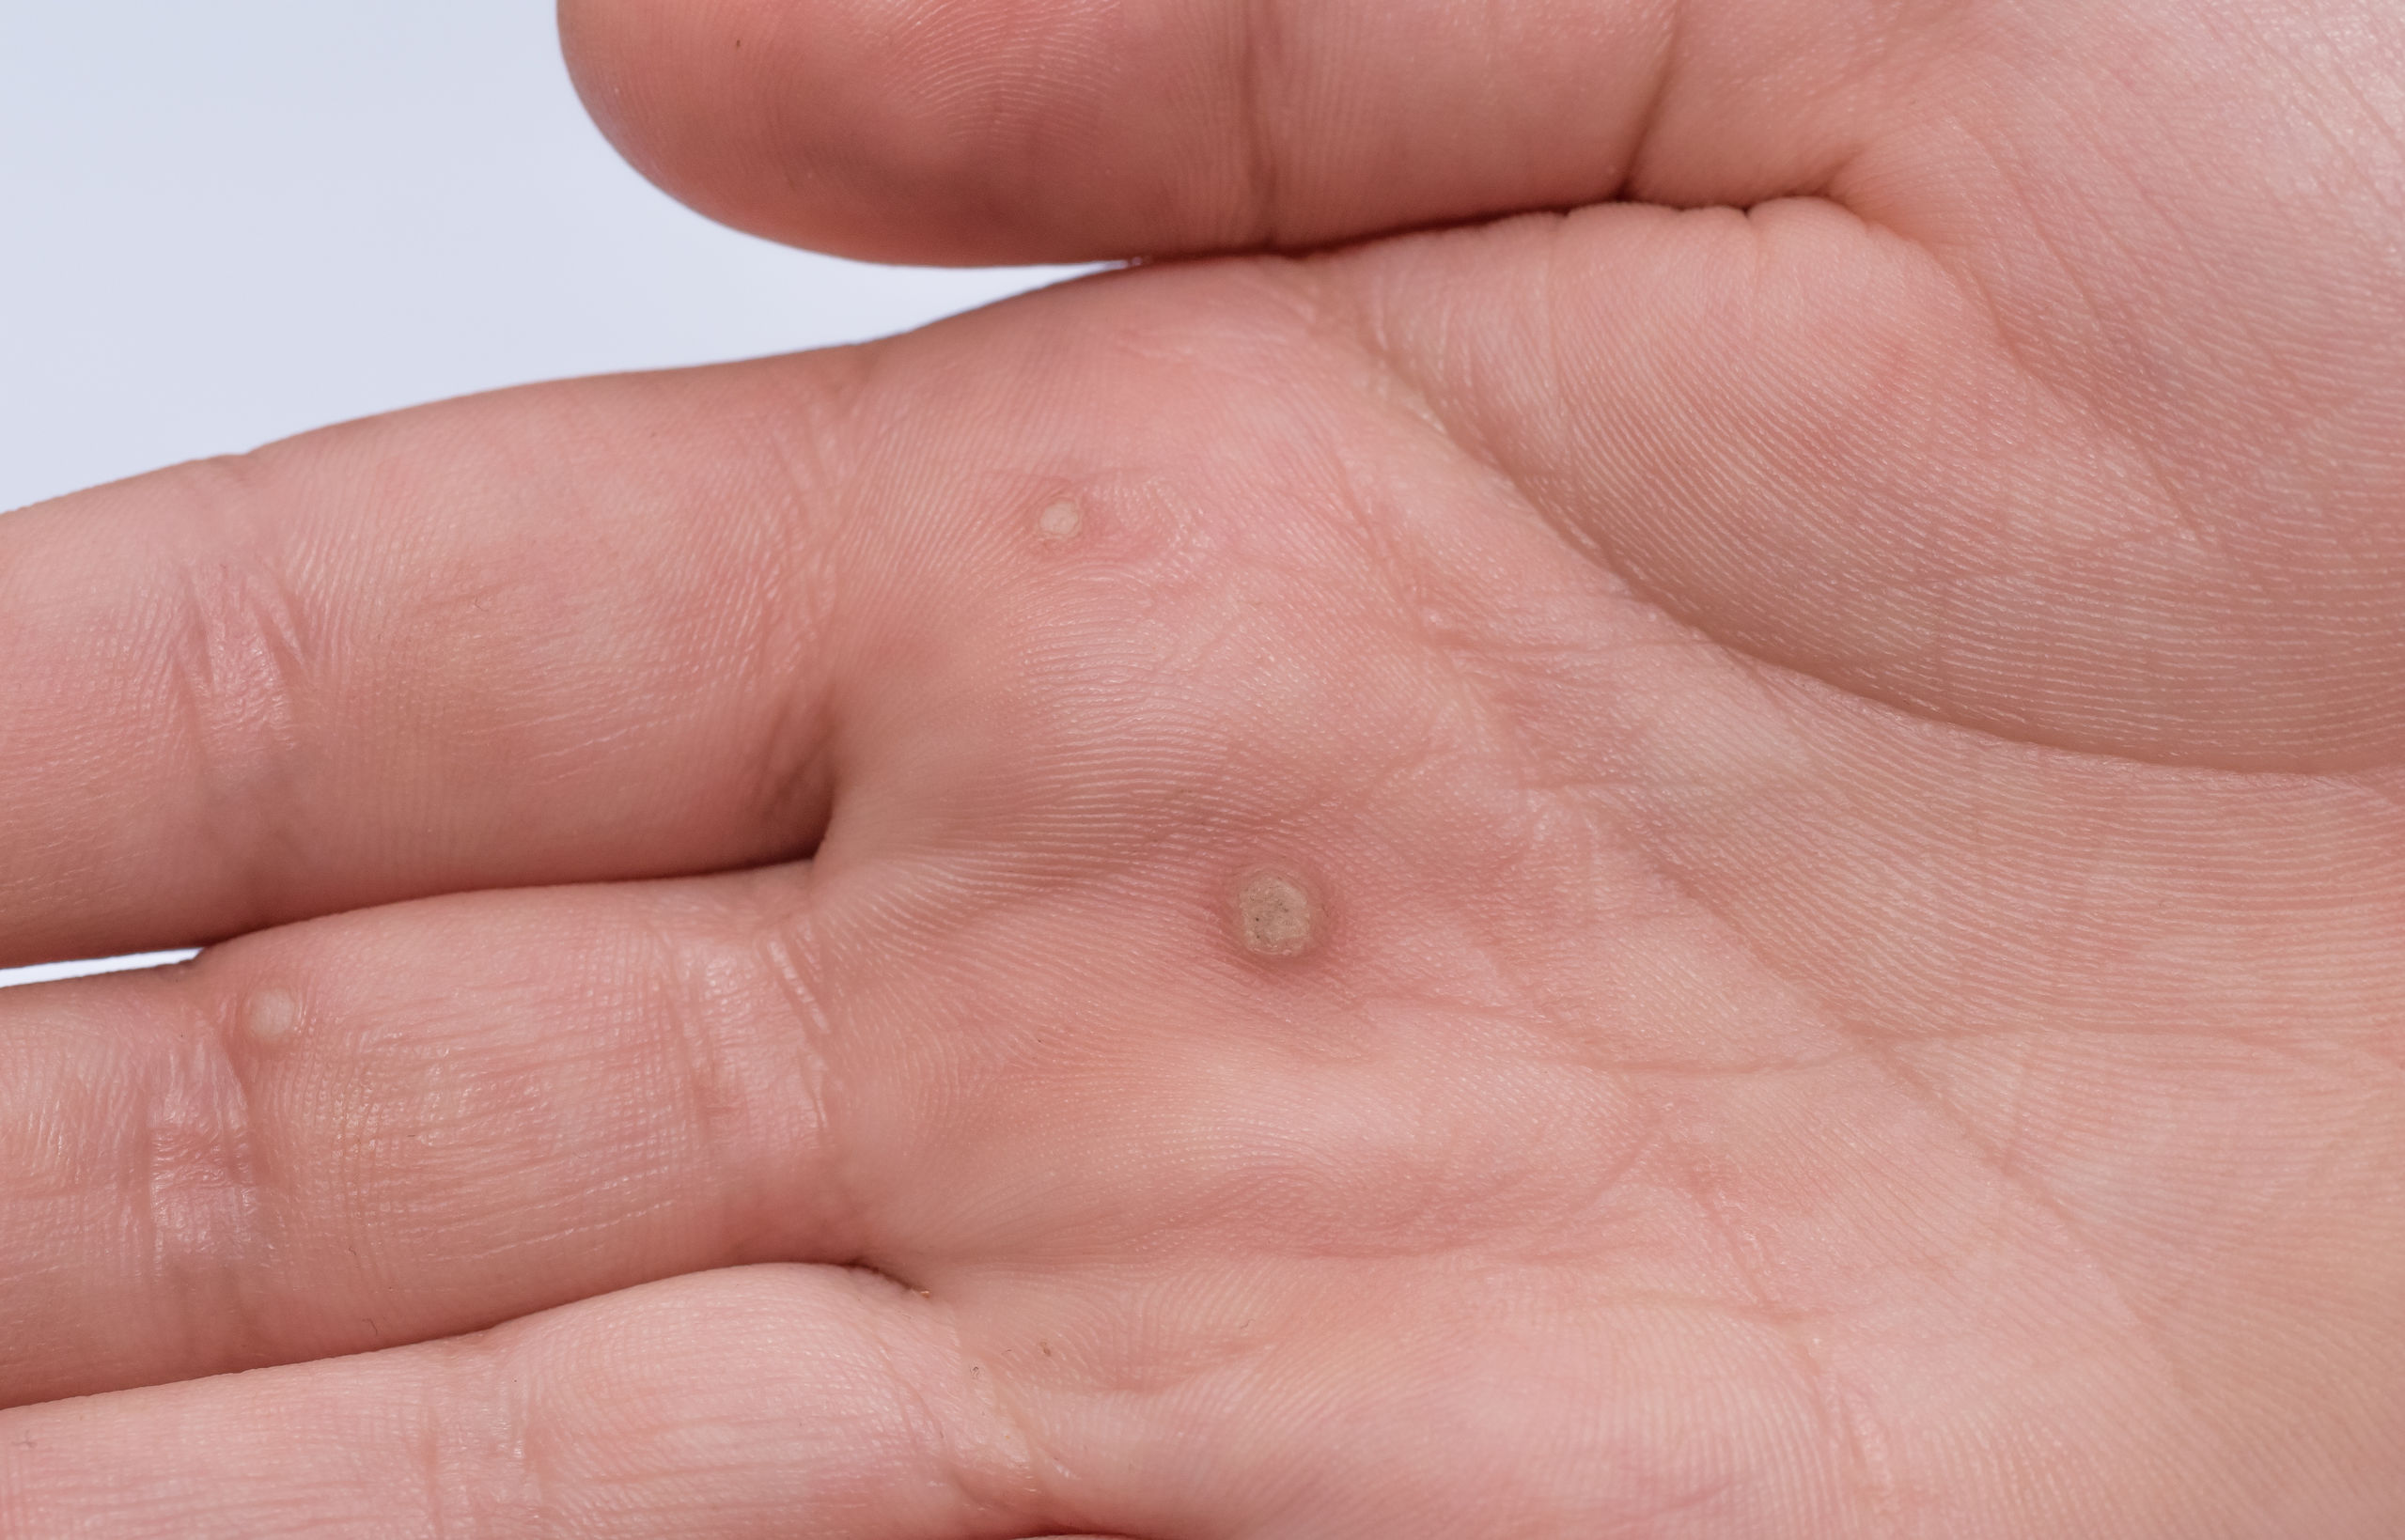 is a wart a virus or fungus